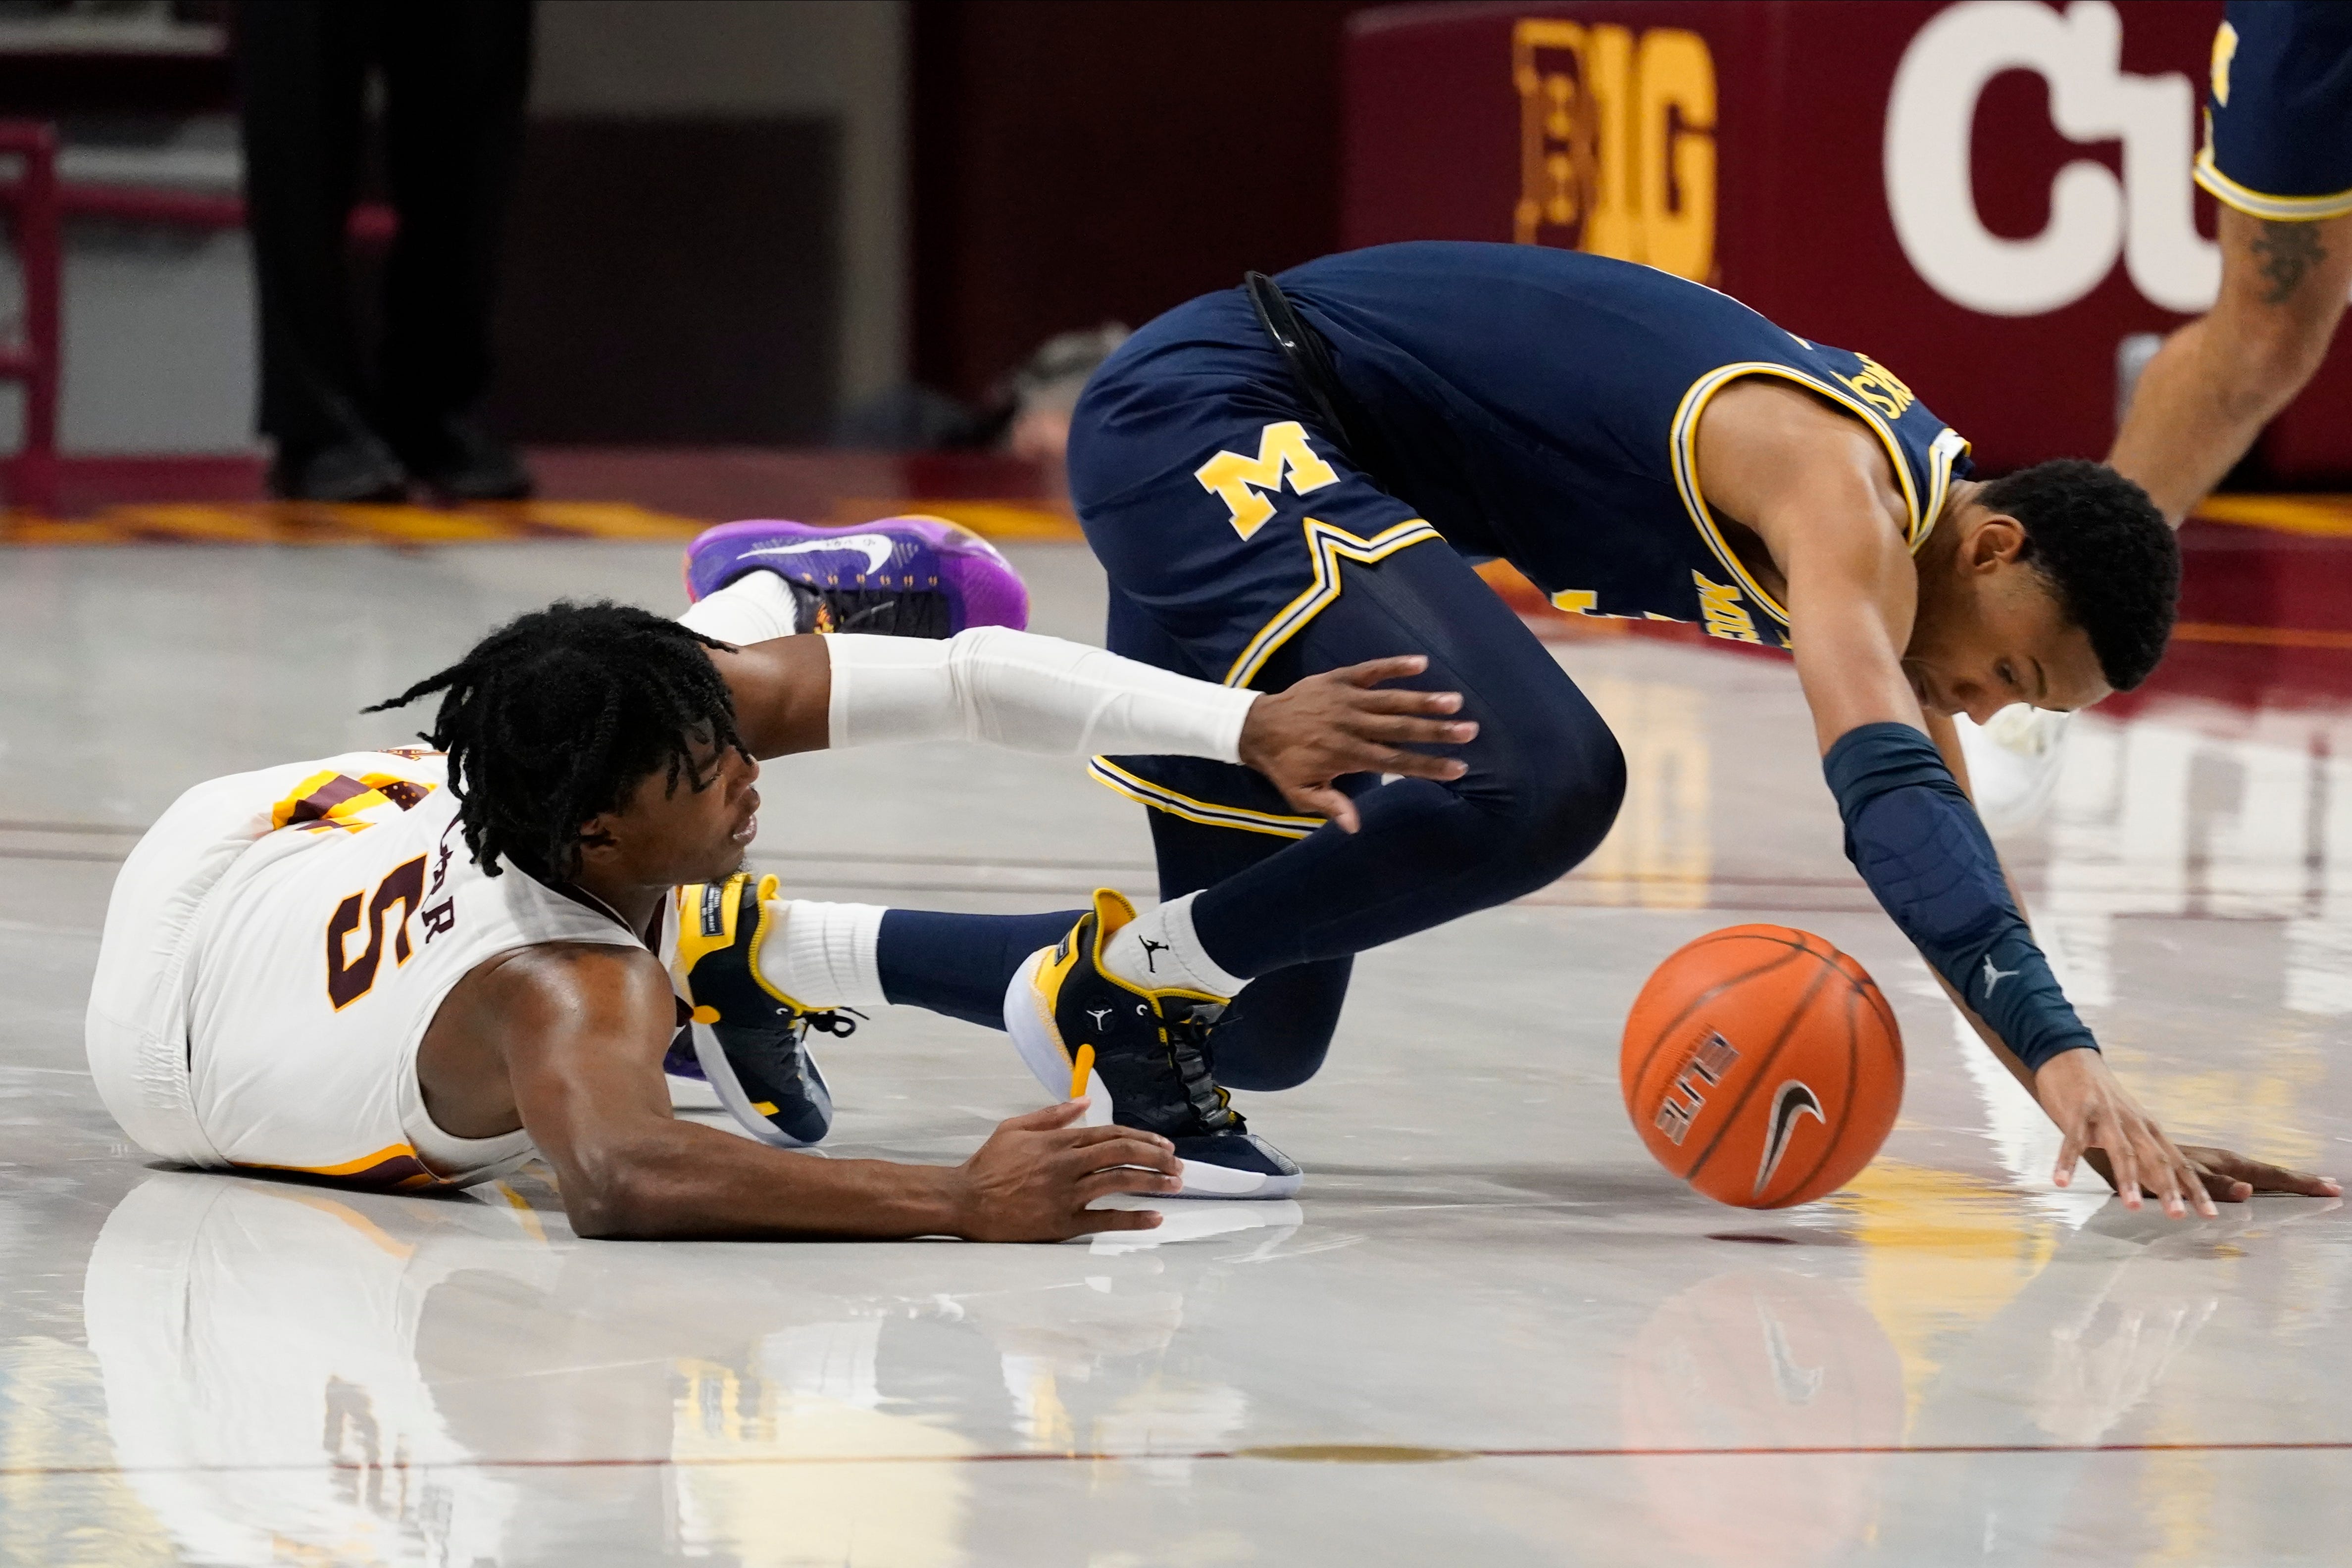 Minnesota's Marcus Carr (5) and Michigan's Zeb Jackson (3) battle for the ball after a collision in the second half.